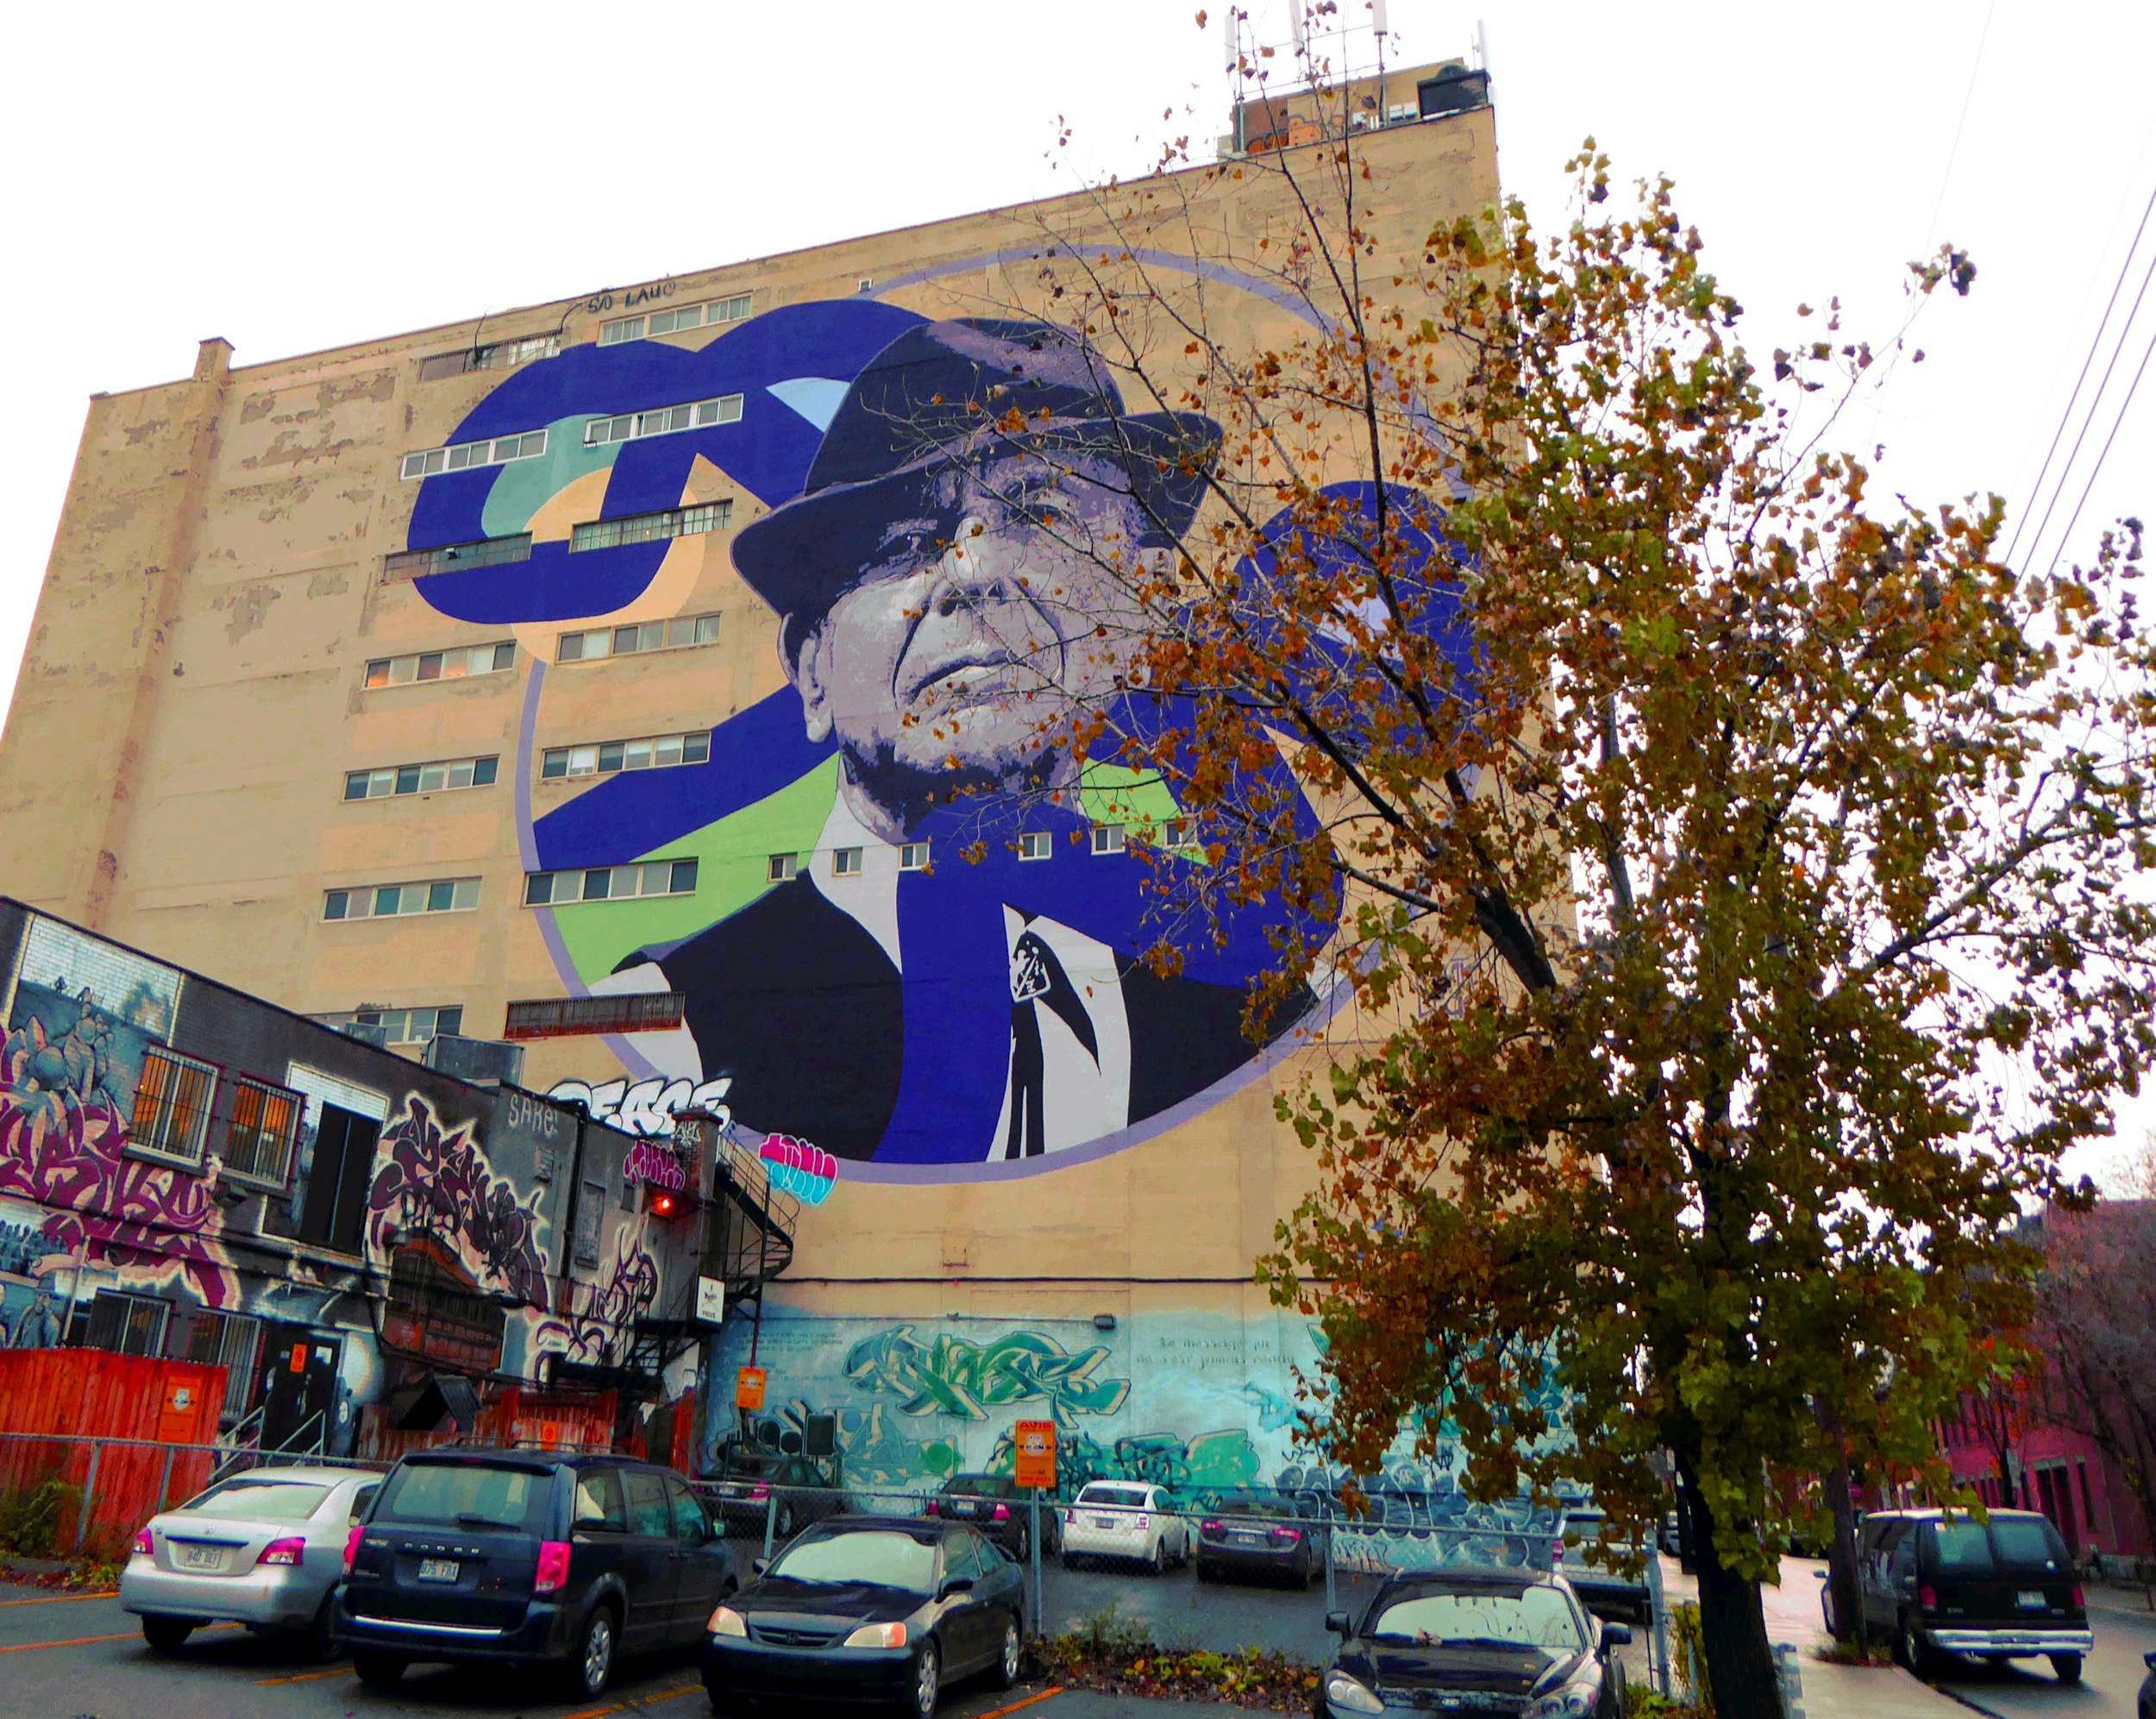 A large mural of Leonard Cohen is seen on the side of a building in Quebec. A tree partially obscuring the painting has autumn leaves turning brown; Montreal in the fall